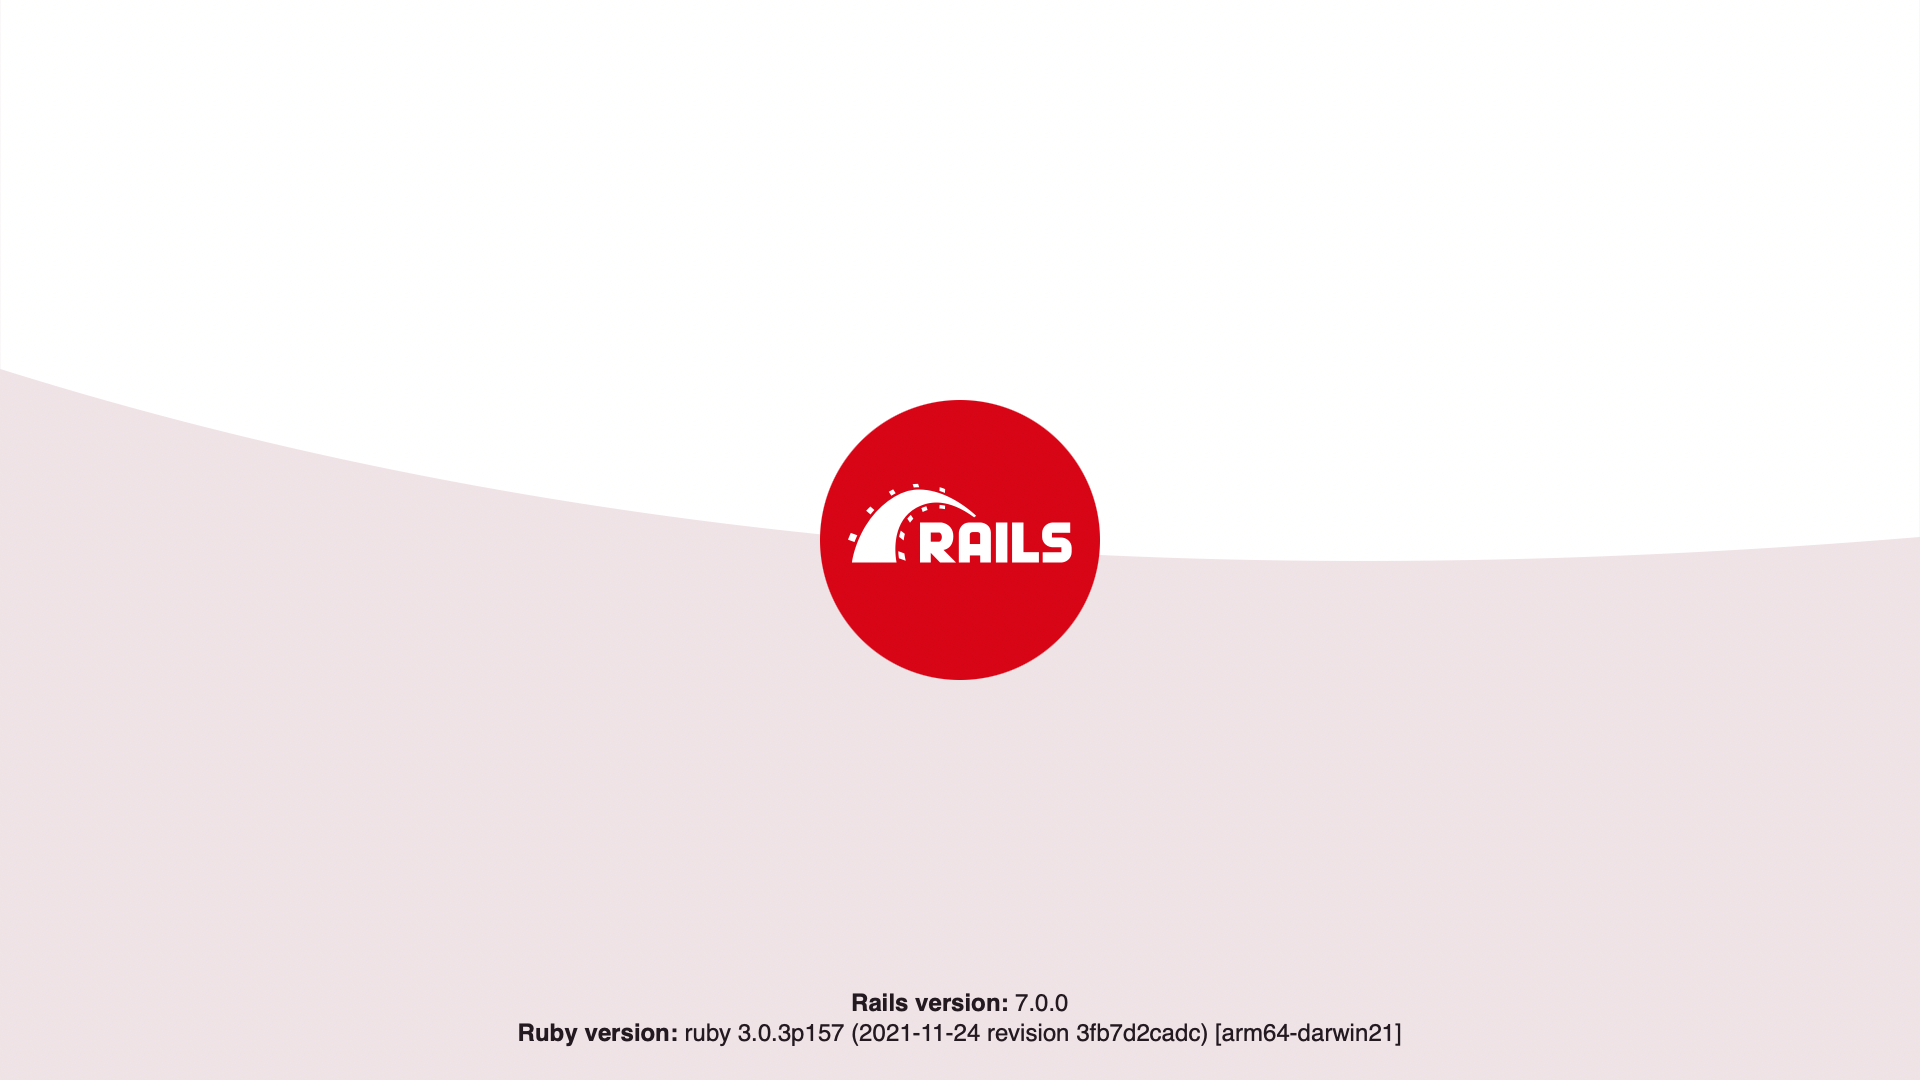 https://railsguides.jp/railsguides/images/getting_started/rails_welcome.png